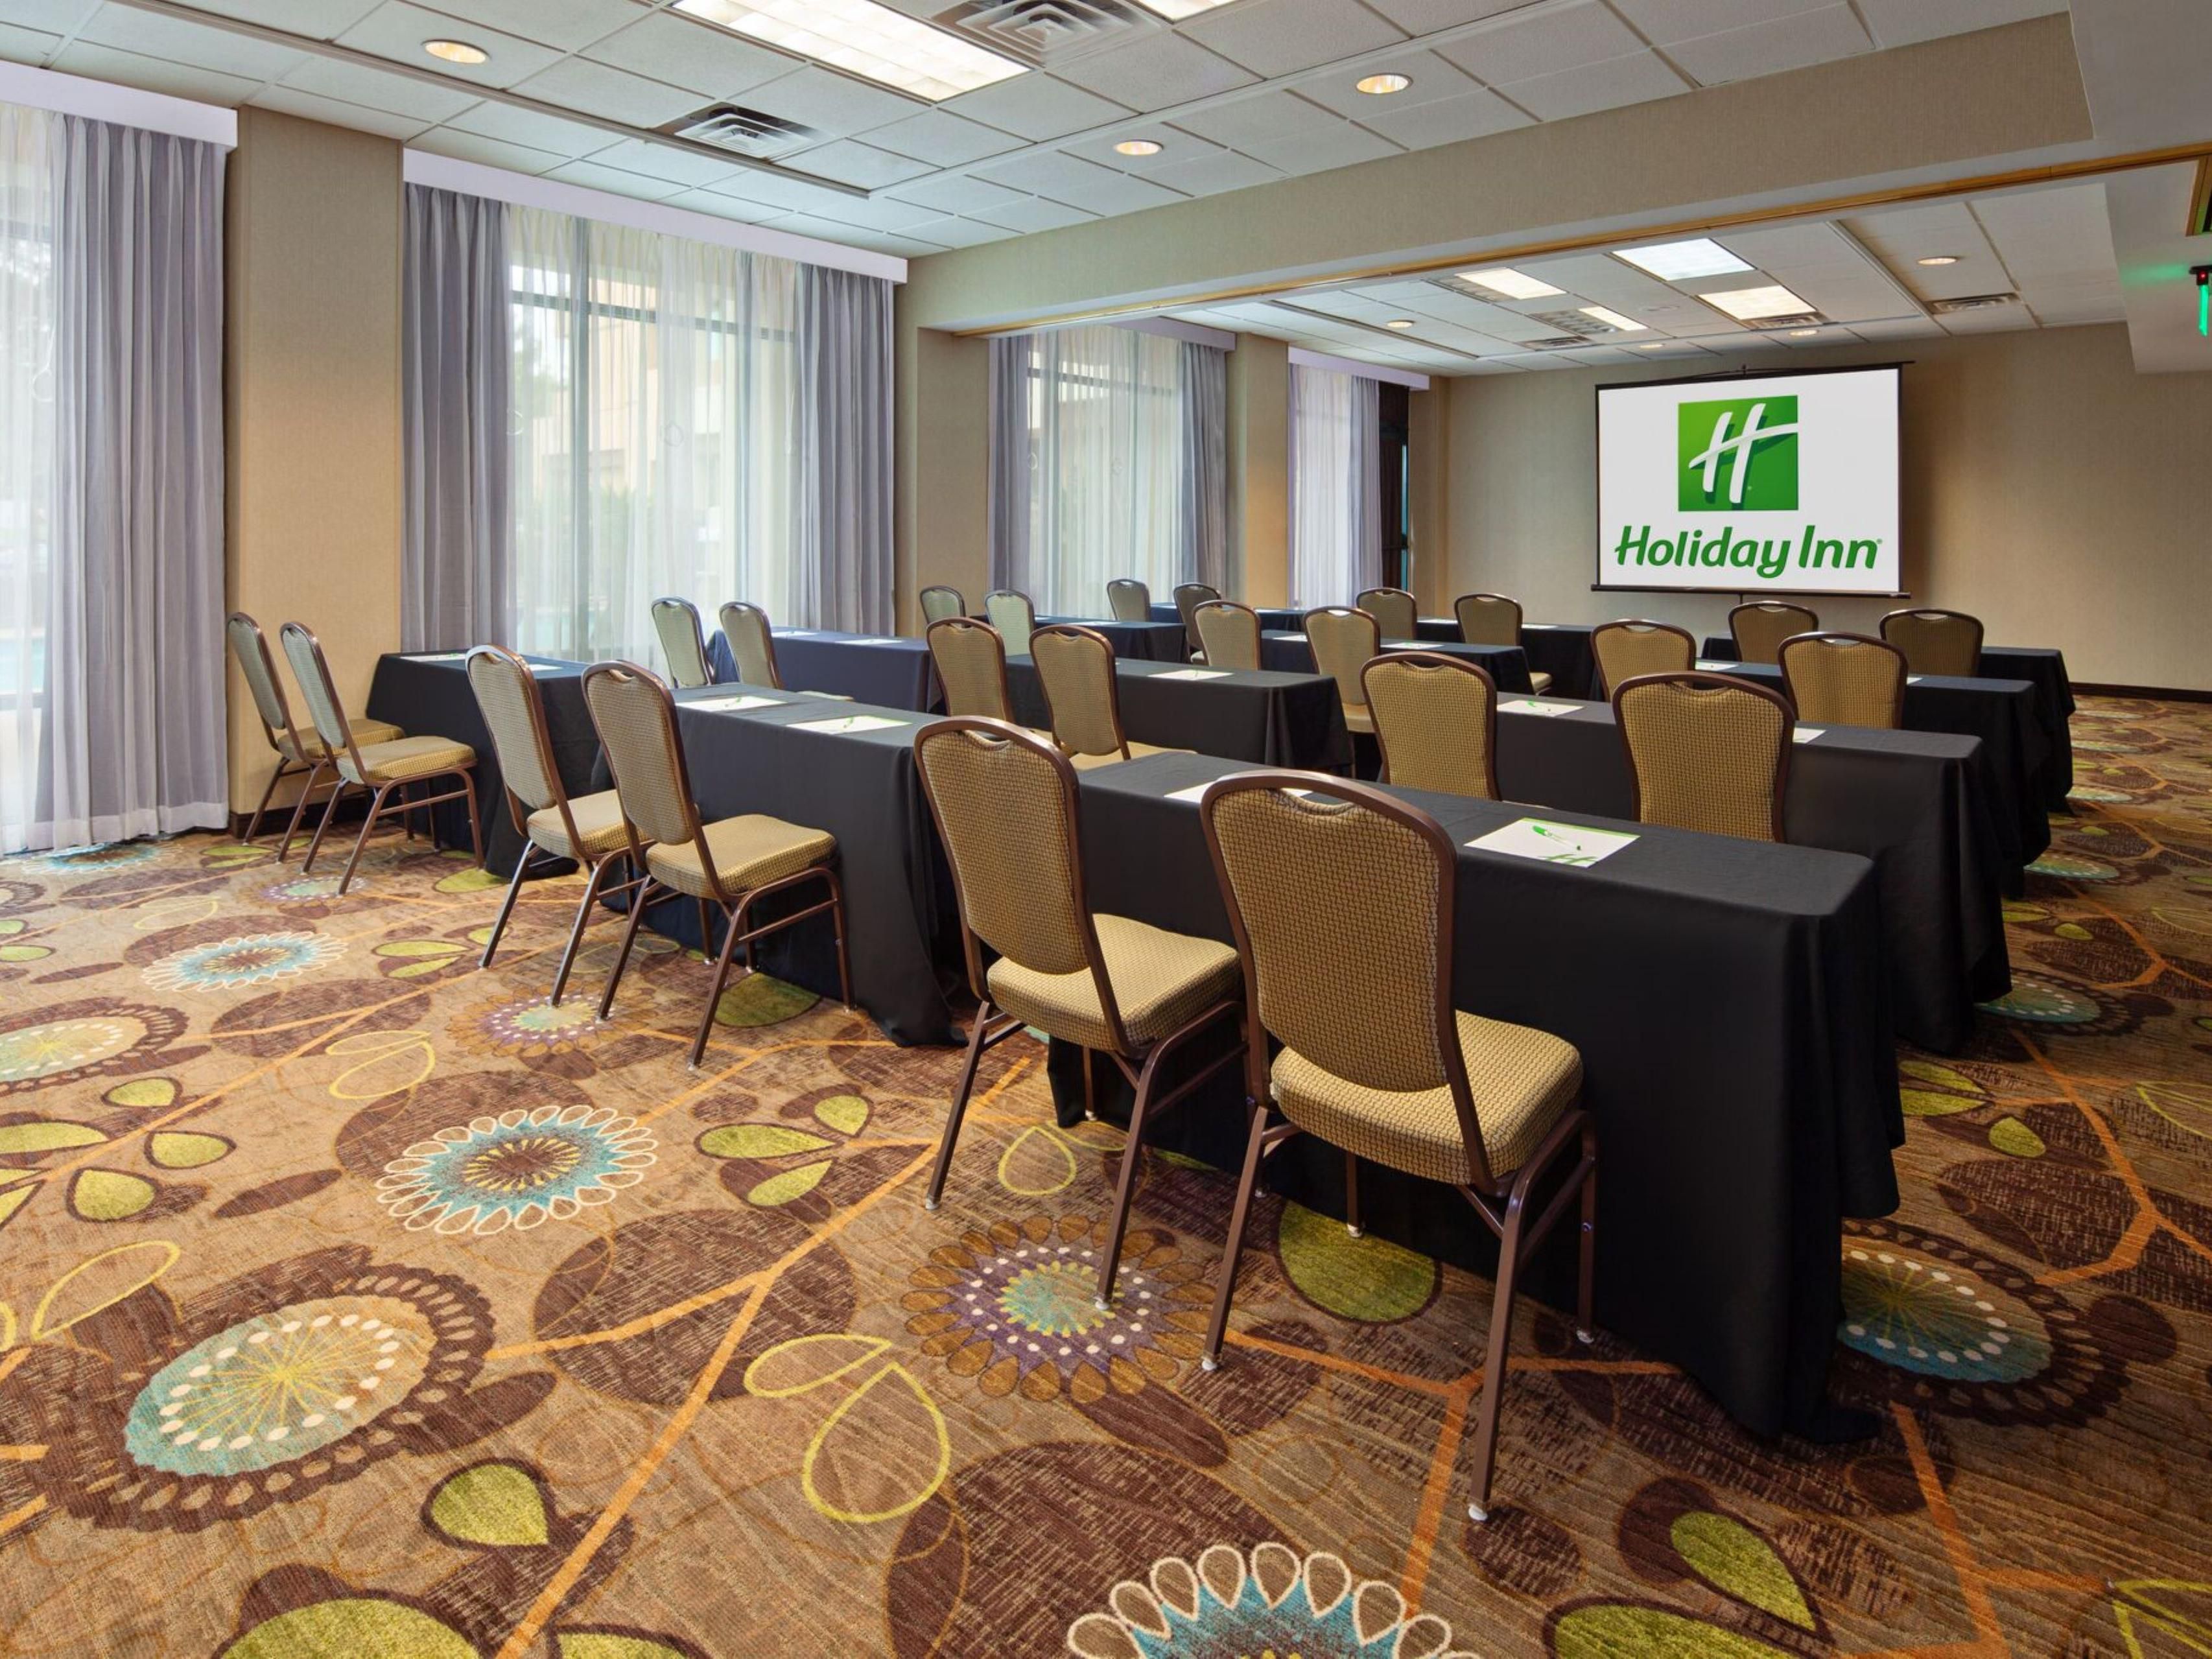 Whether it's a work conference or a special event, we offer 1650 sq ft of newly renovated Banquet space as well as 2 Boardrooms to fit your needs.